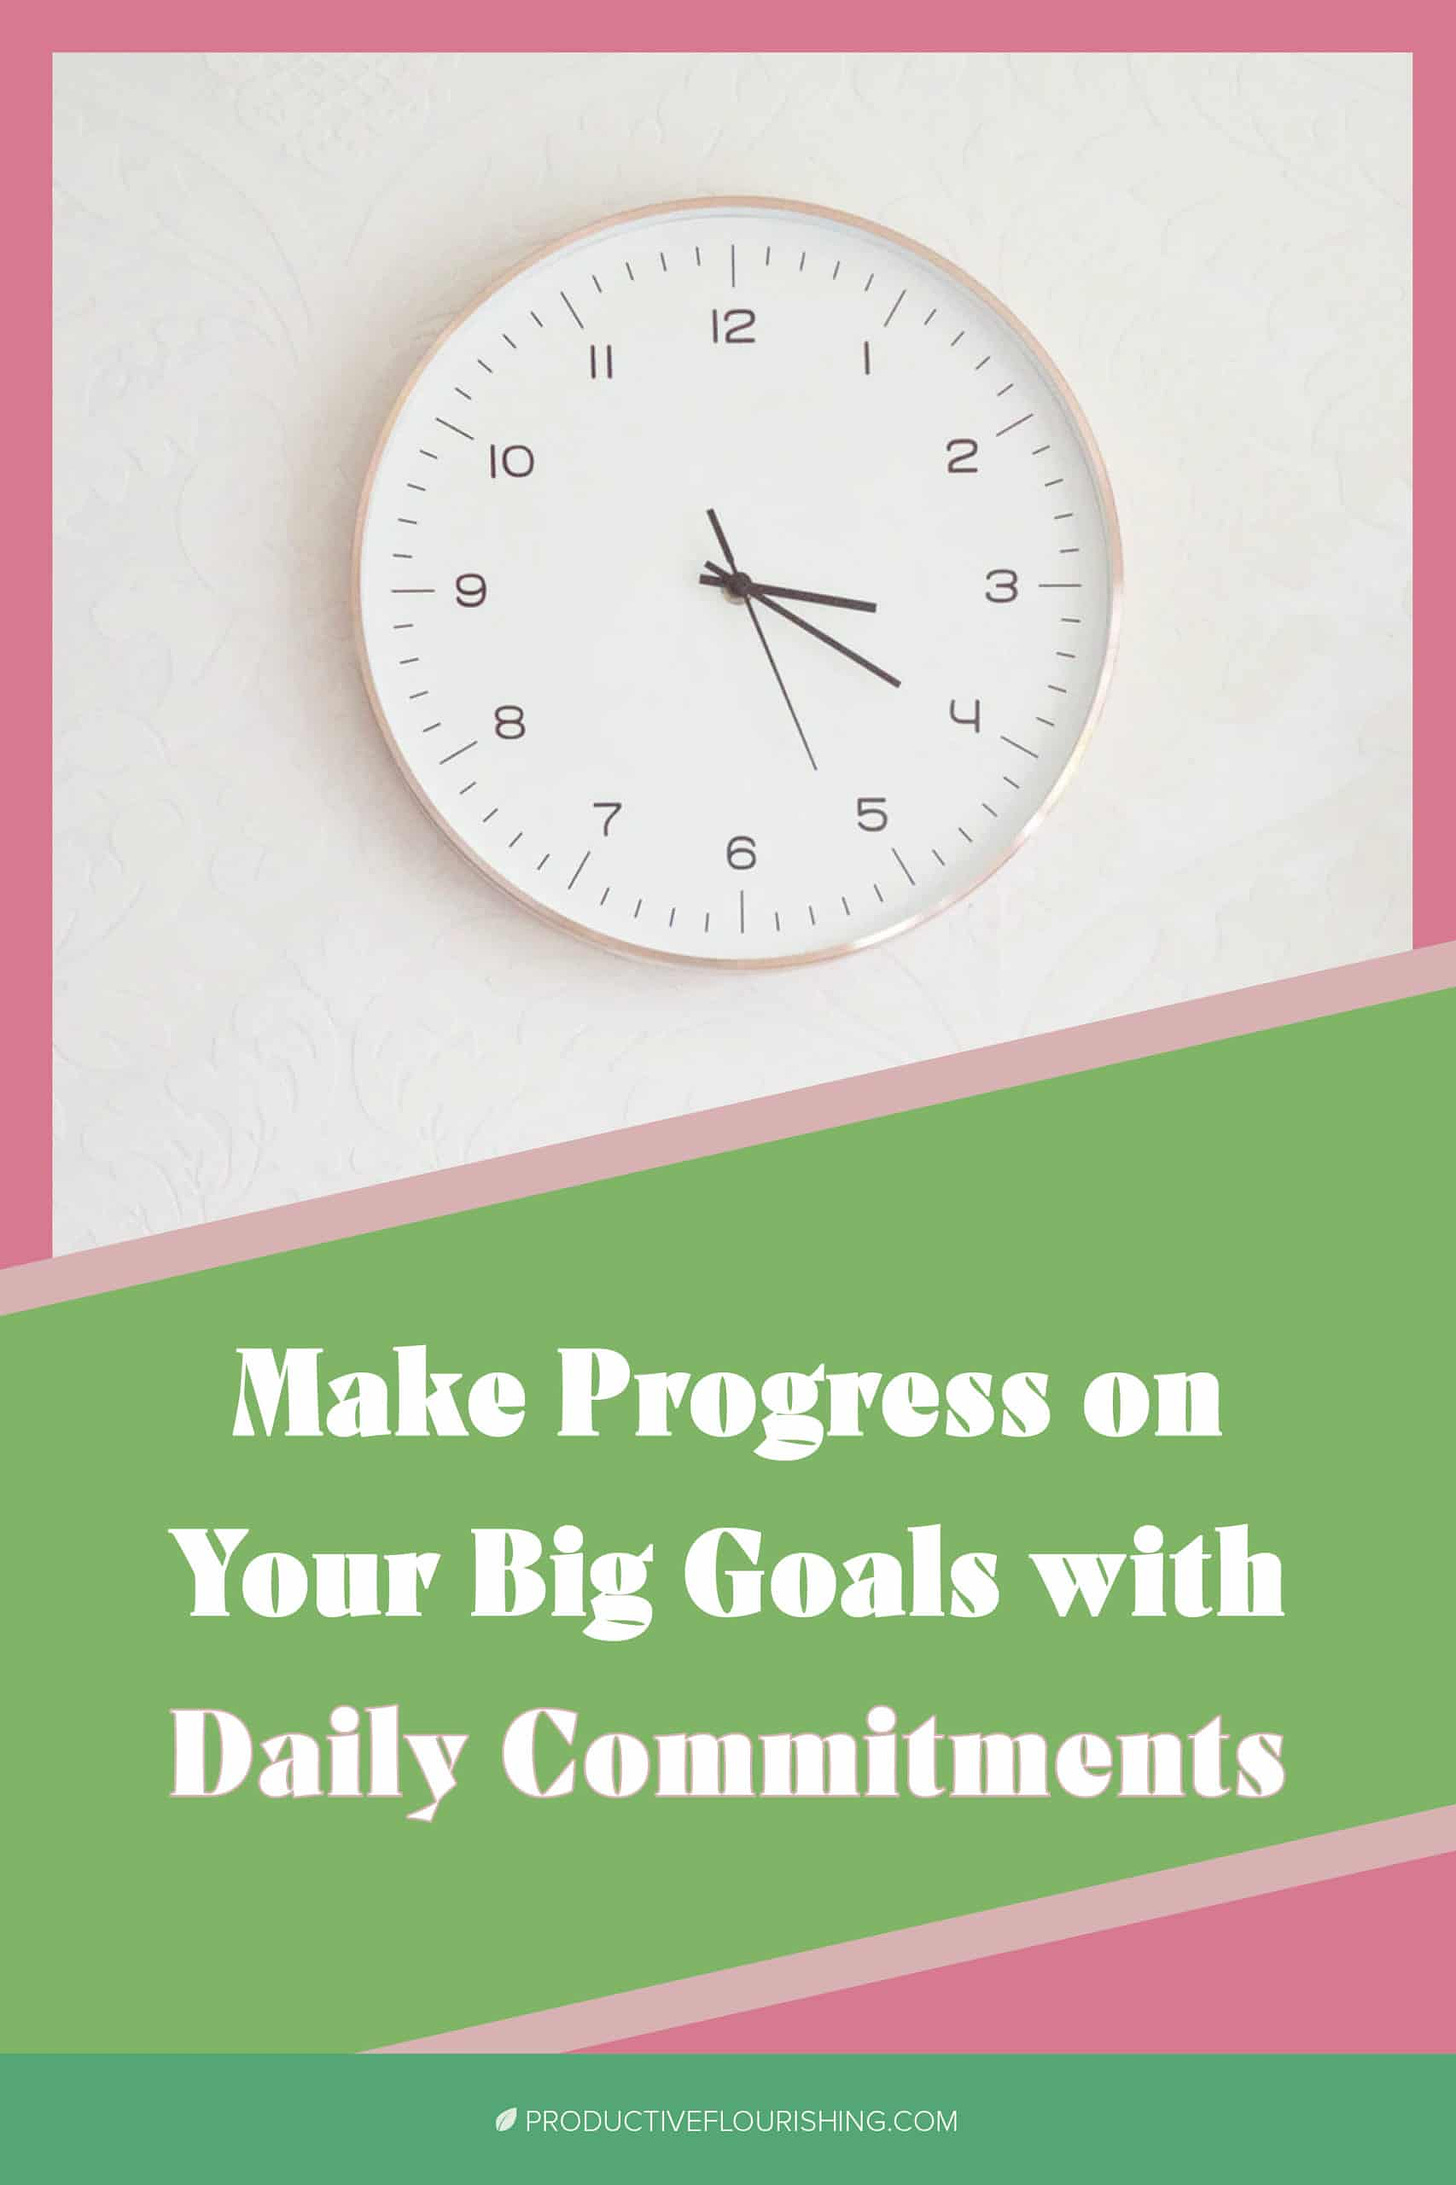 Make the day count with small commitments each day that help you make progress towards your big goals. In reality it's about the effort in the 